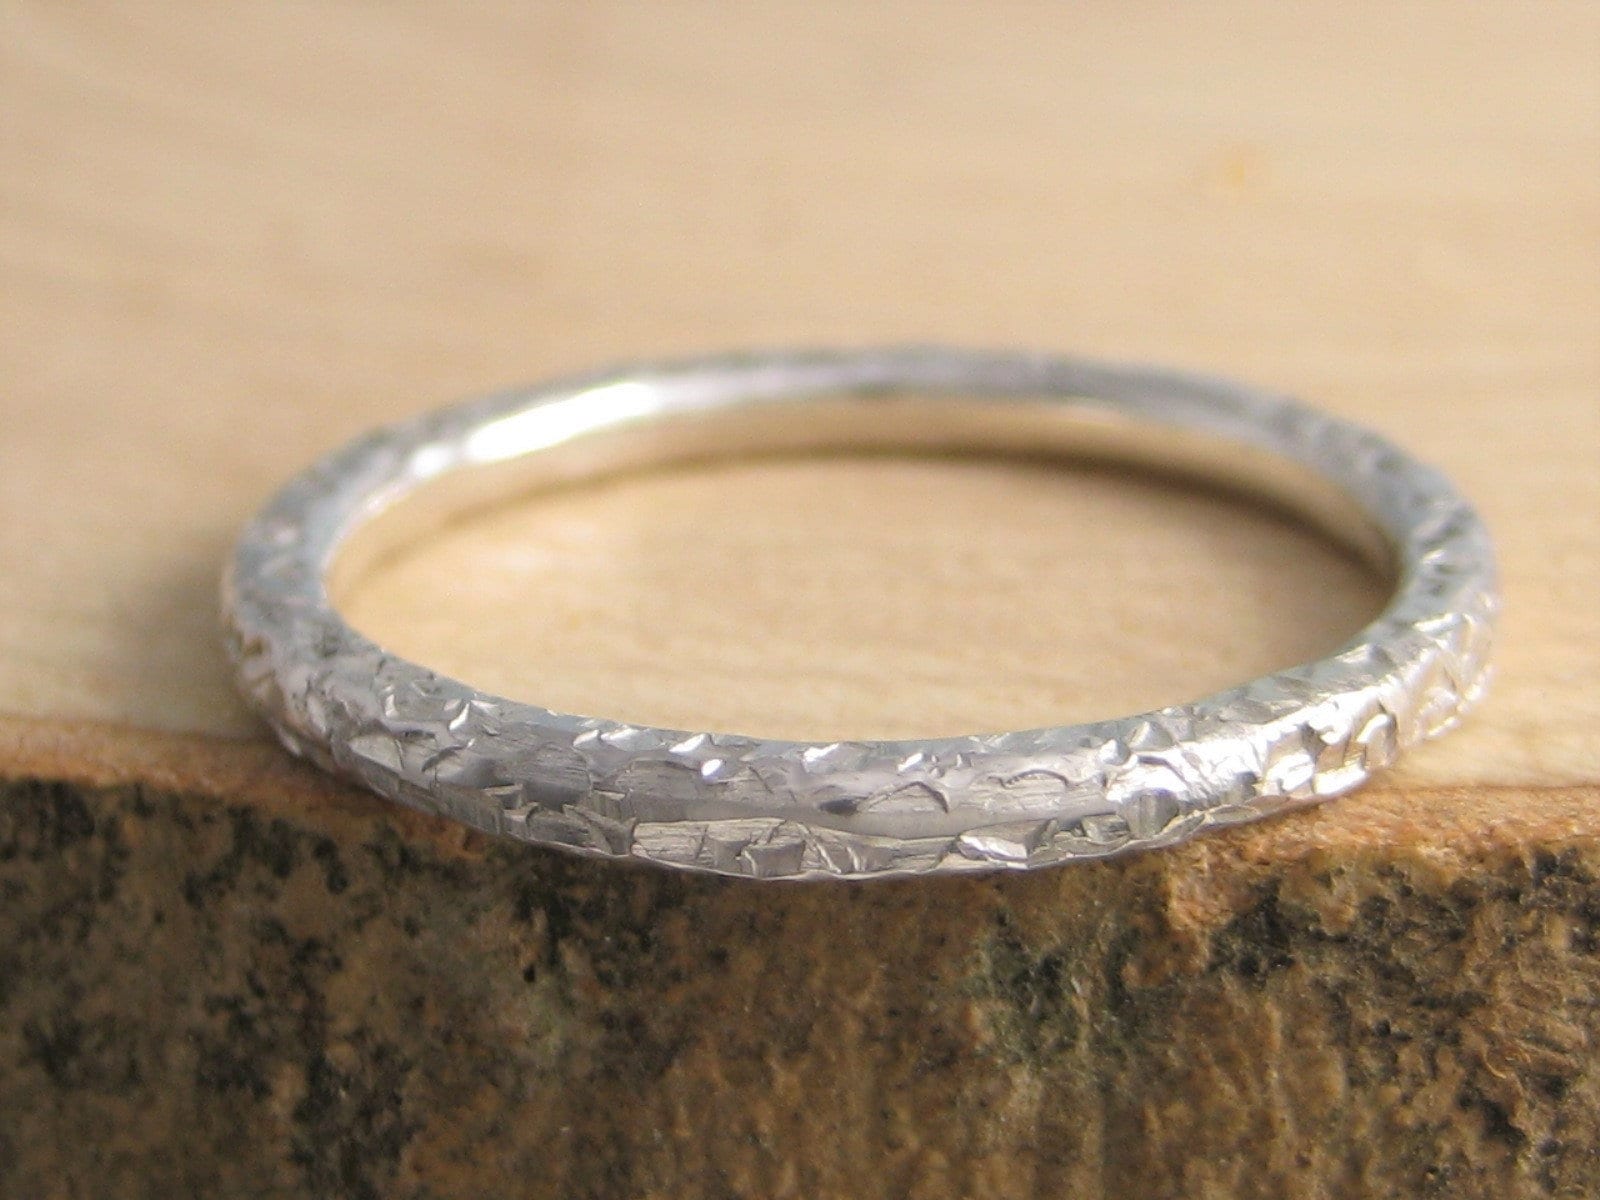 Handmade 2mm Solid Sterling Silver Bark Hammered Texture Ring